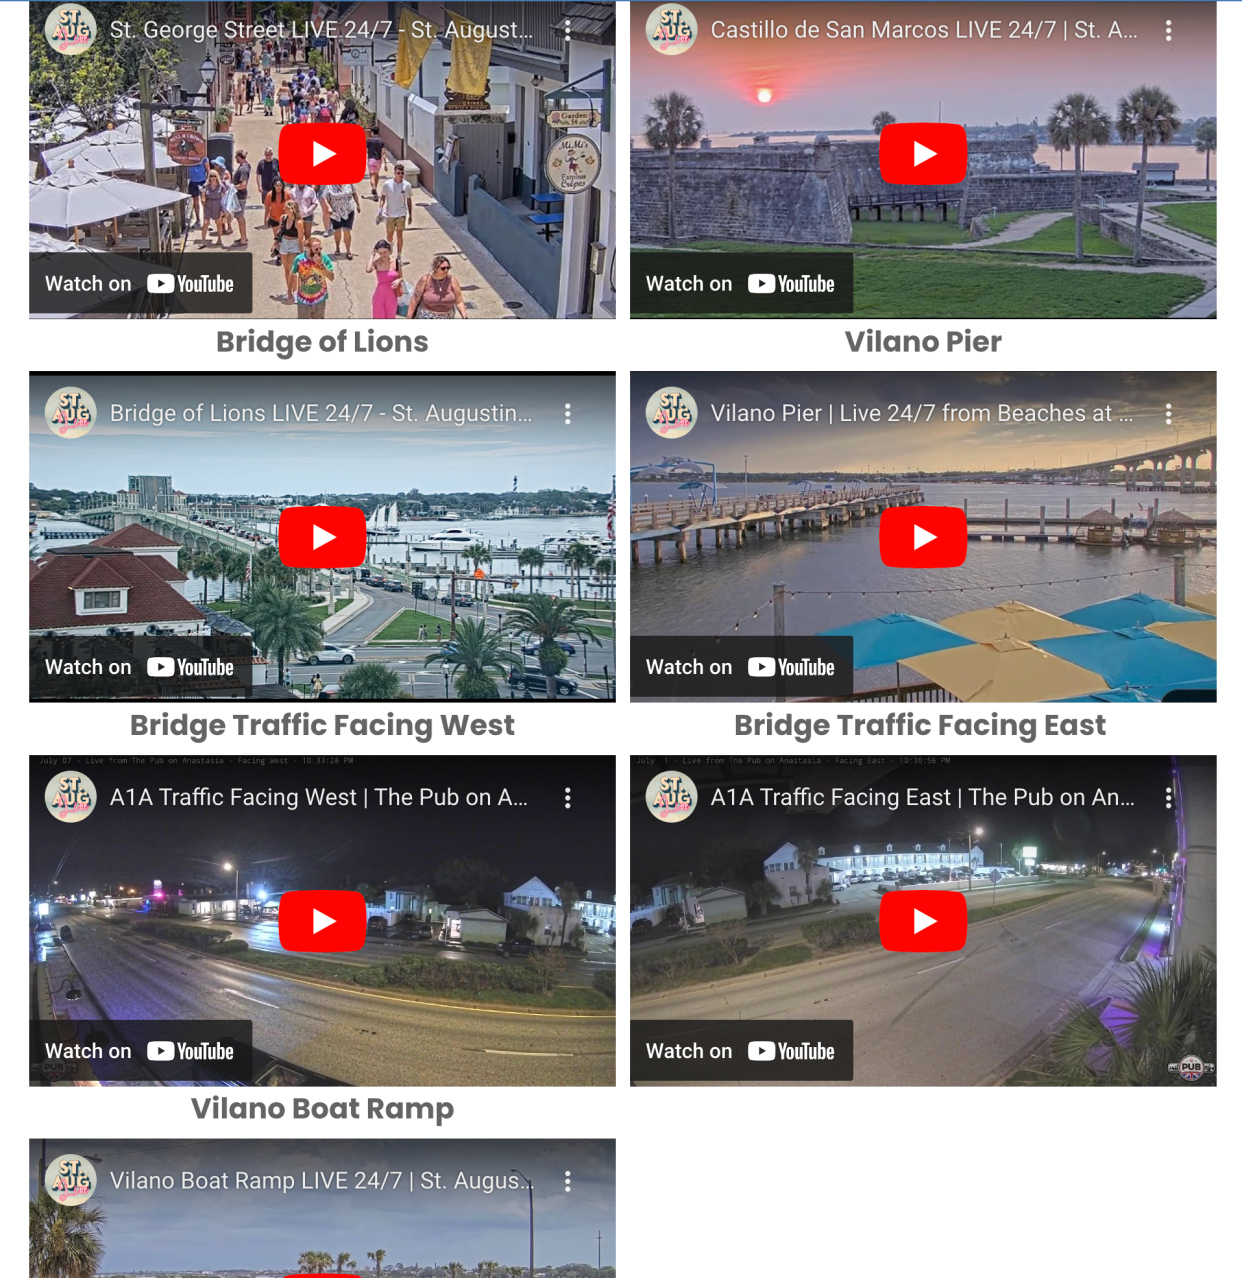 St. Augustine Live recently launched webcams observing these high-profile locations in St. Johns County.